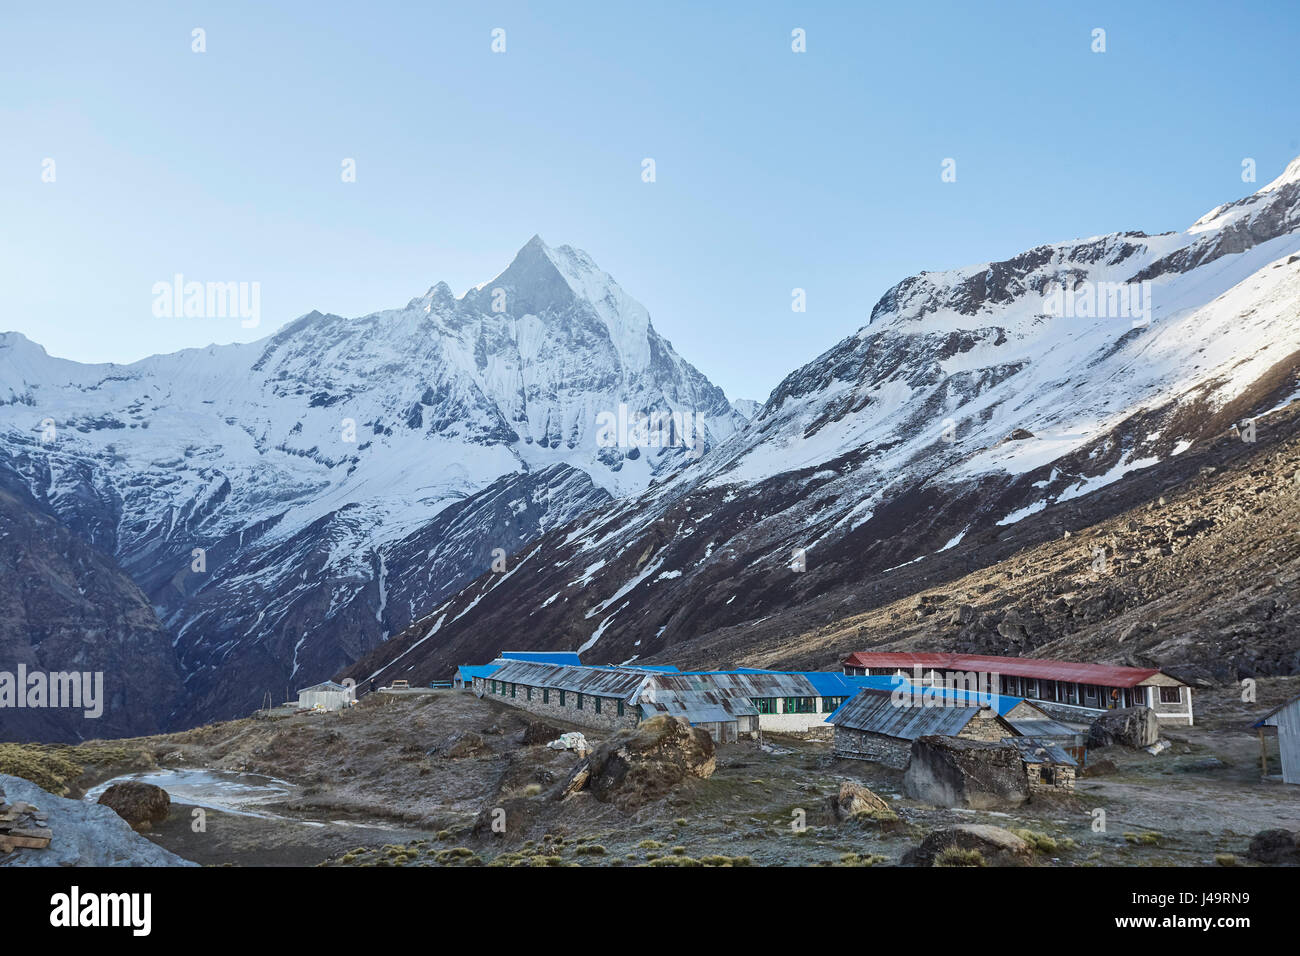 Remote accommodation in the valleys of the himalayan mountain range, Nepal. Stock Photo